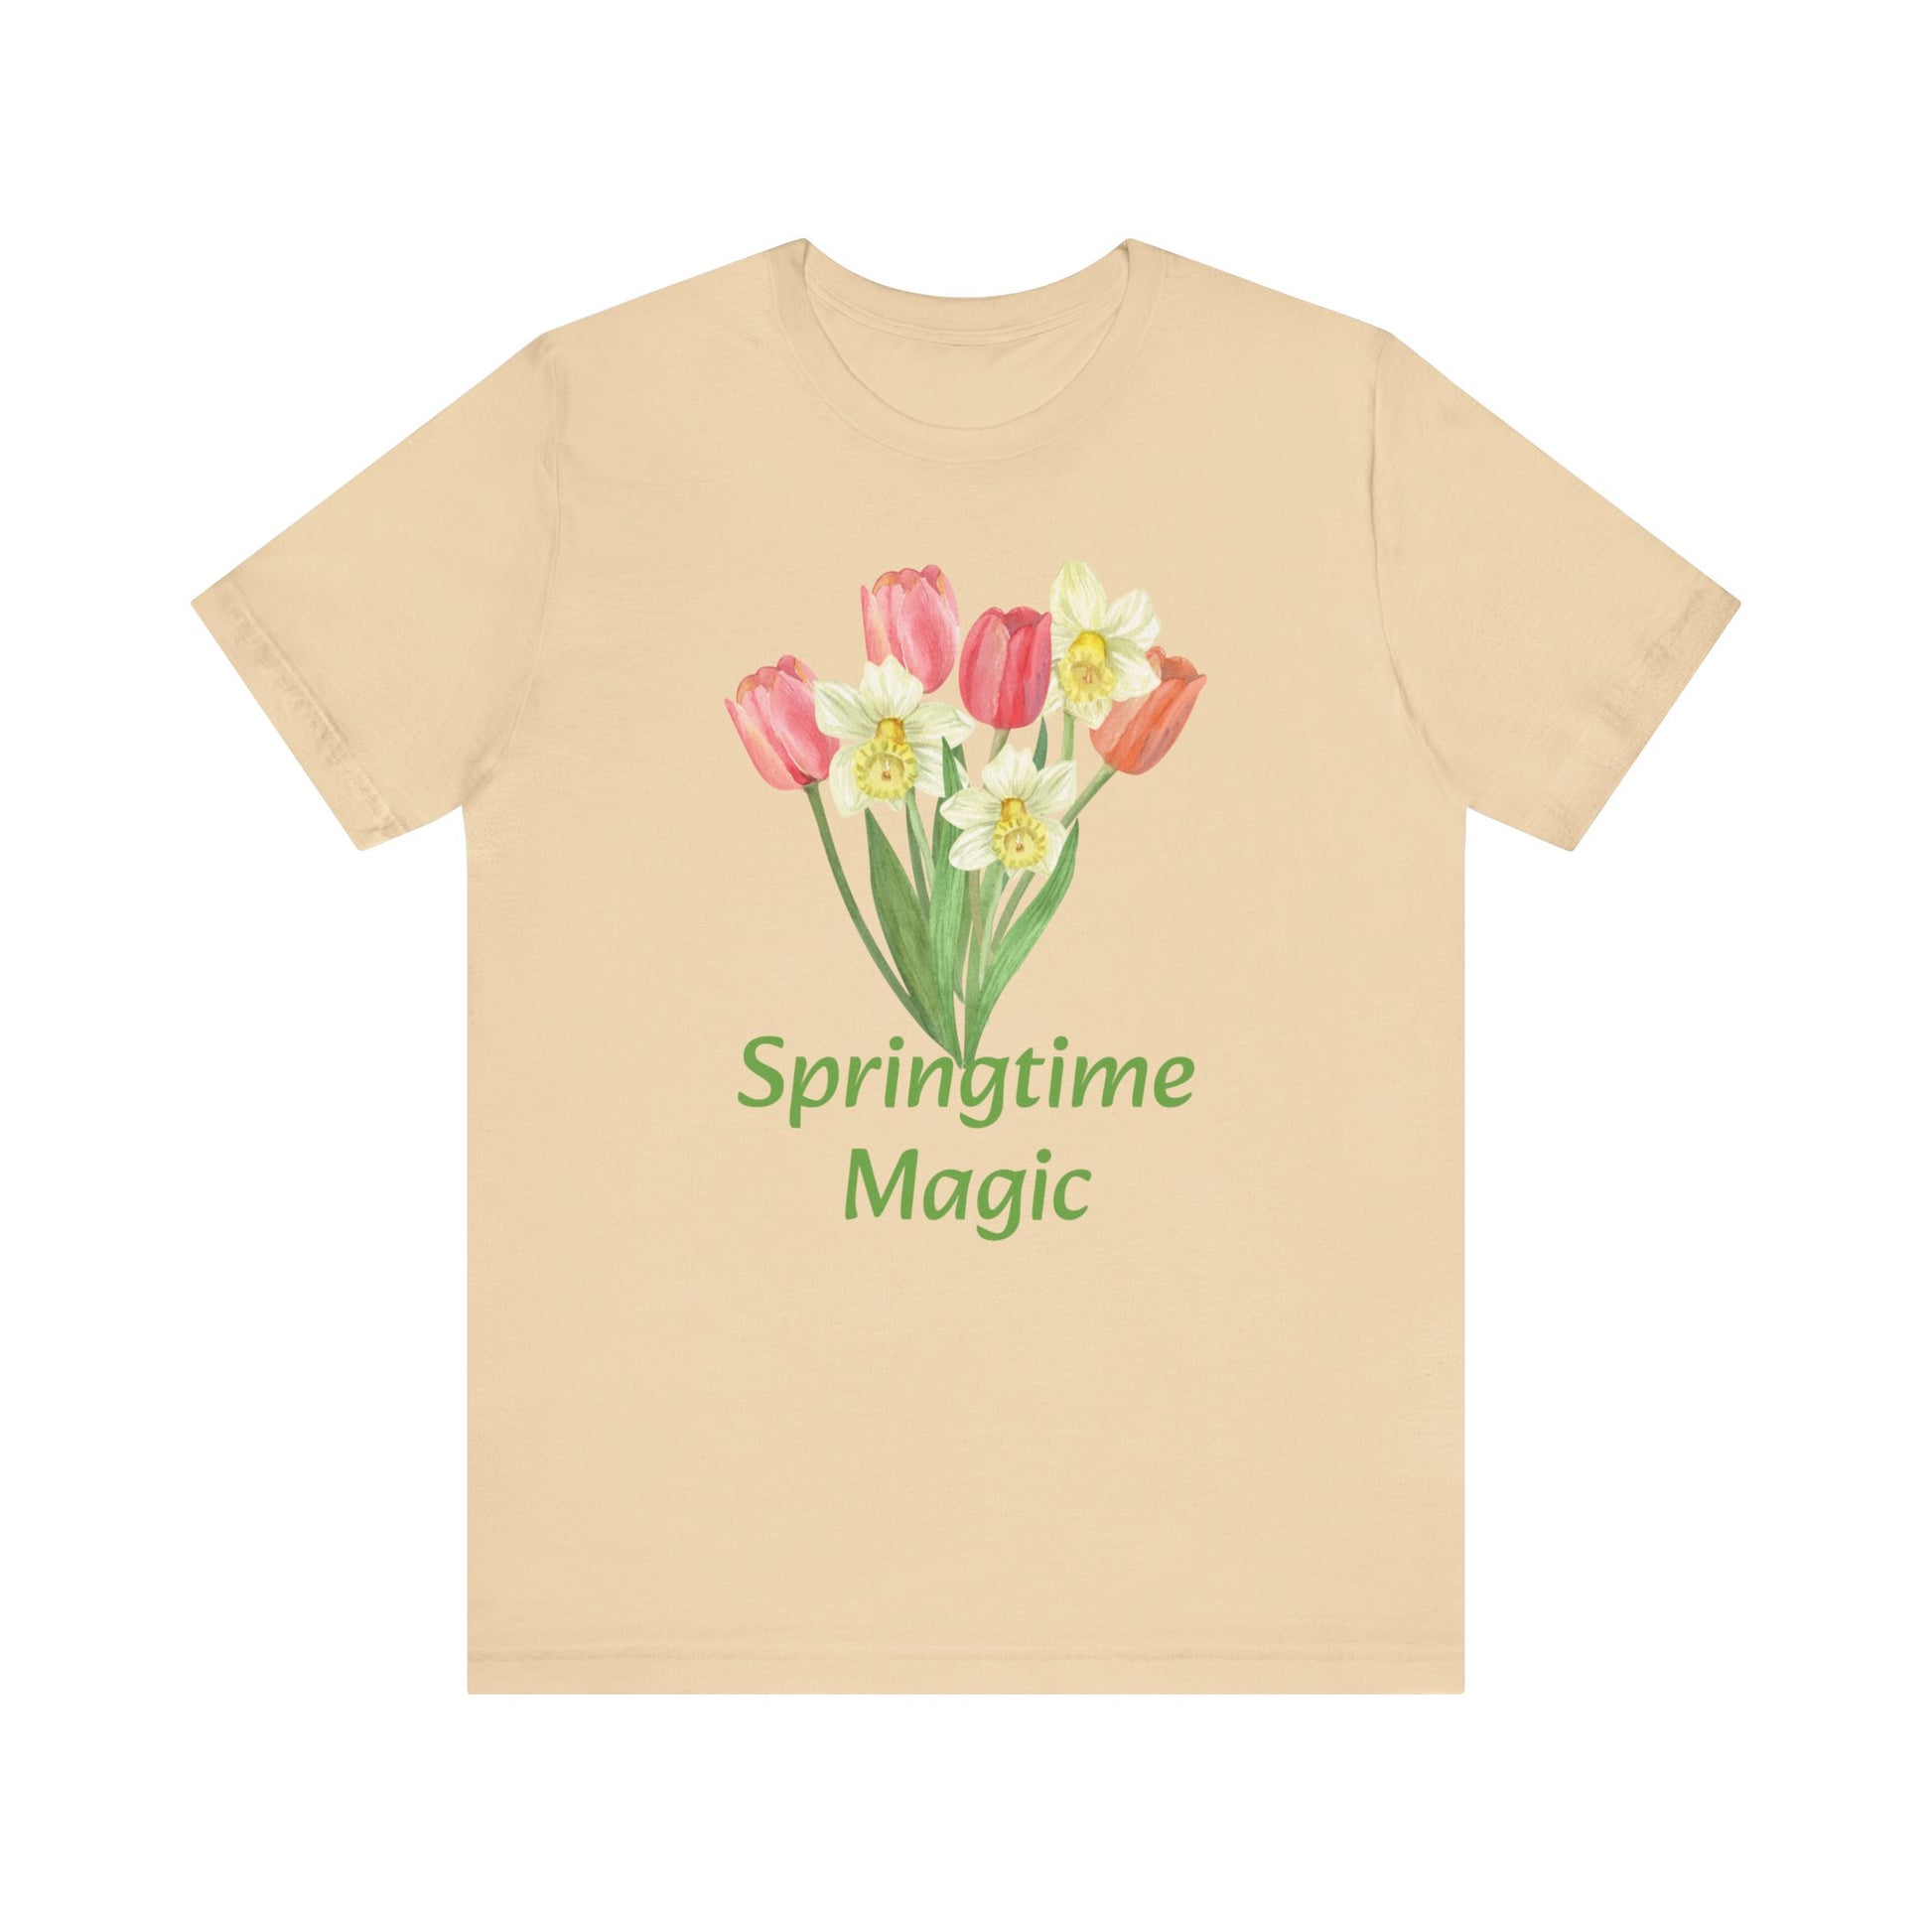 Beige cotton t-shirt with a floral design and the words "springtime magic" - Unisex Springtime-Magic T-shirt: Cotton; Bella + Canvas from Printify.